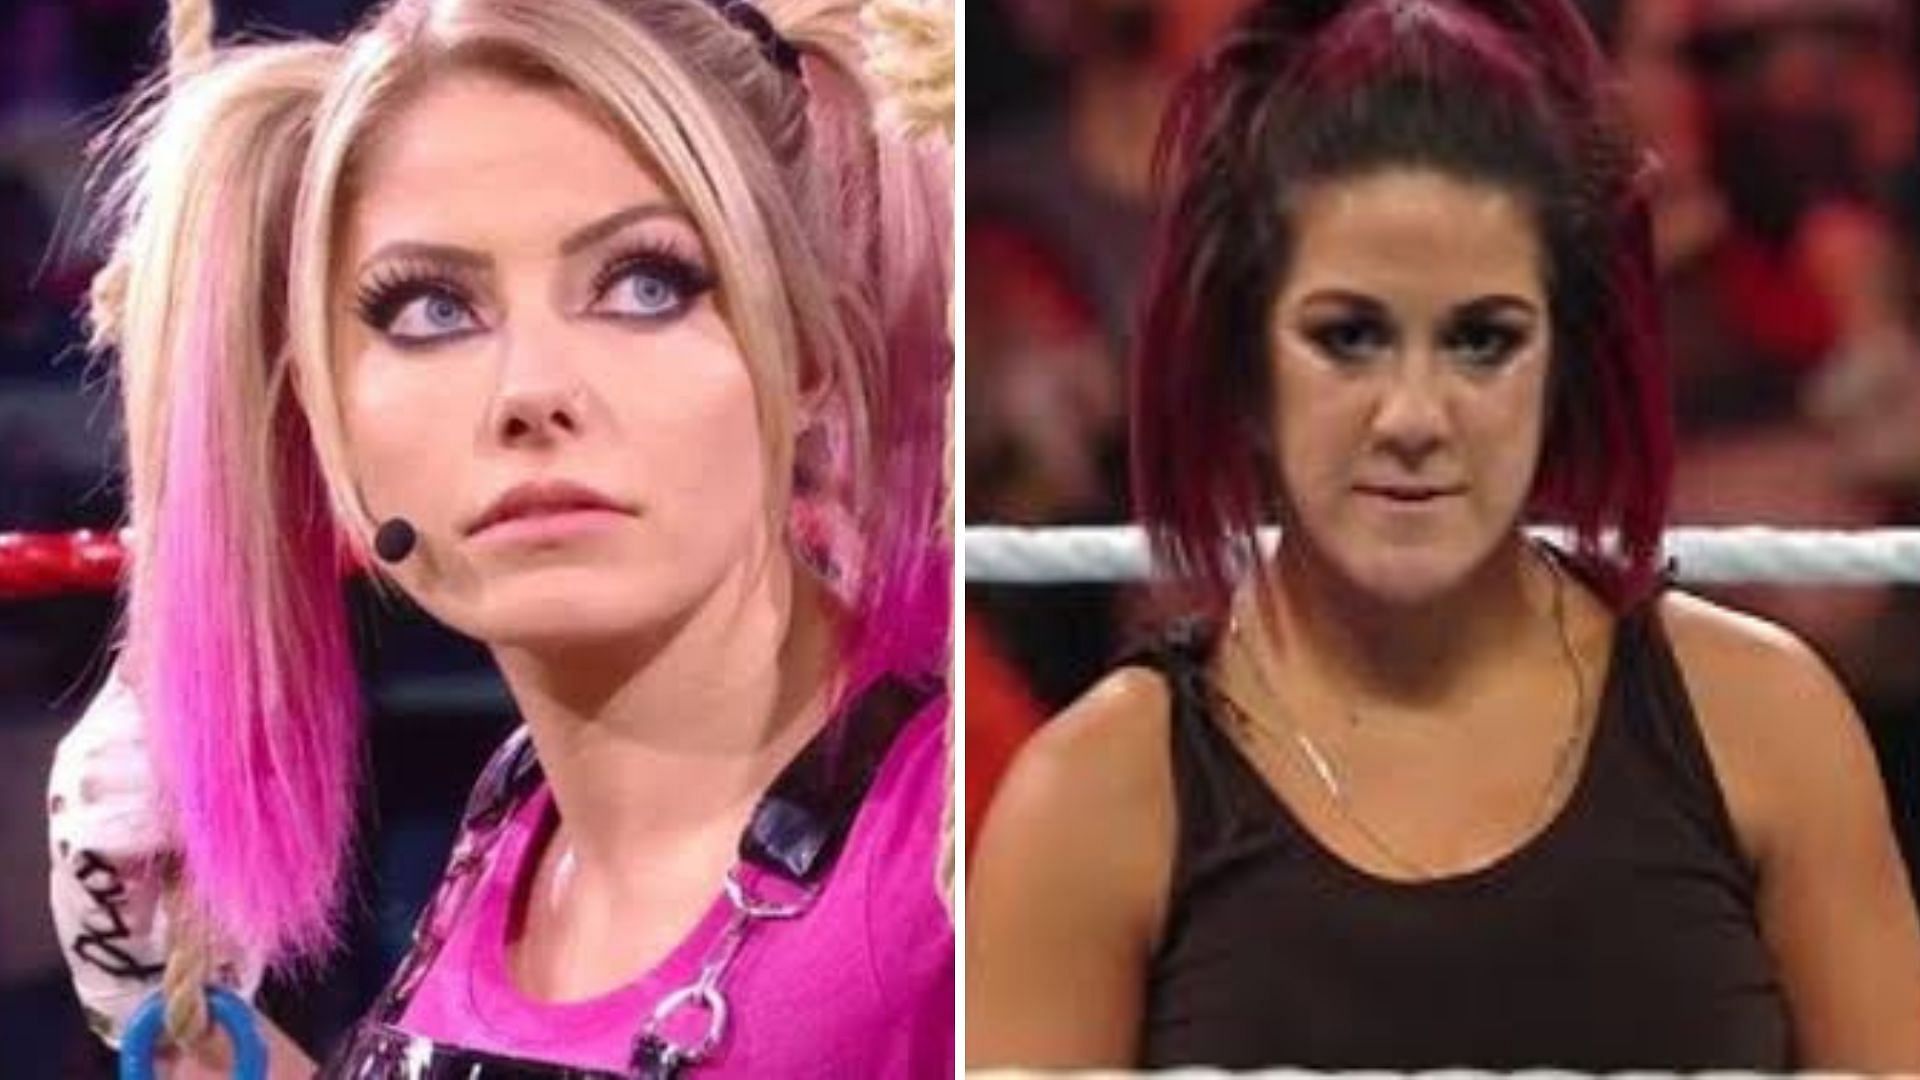 Bayley and Bliss are two of WWE